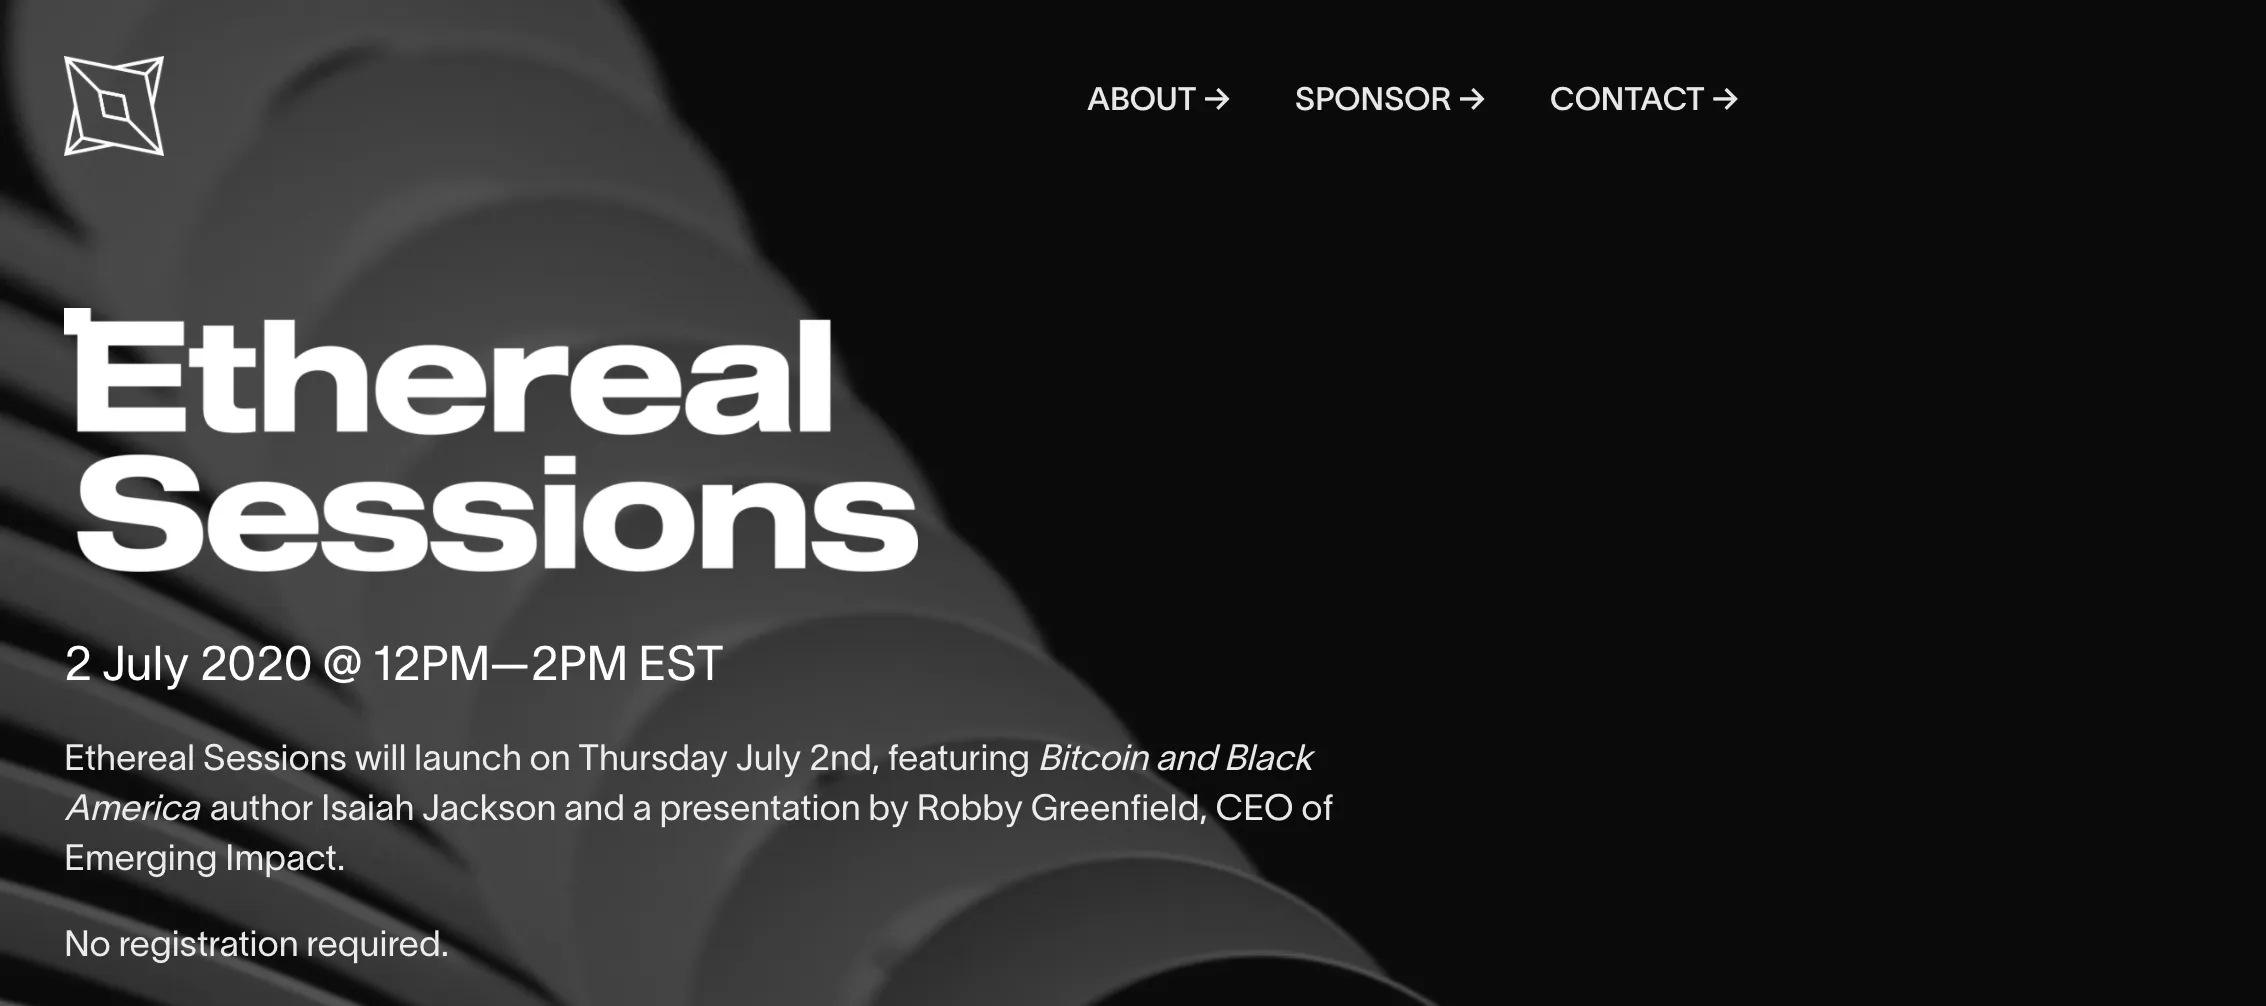 Ethereal Sessions begins July 2